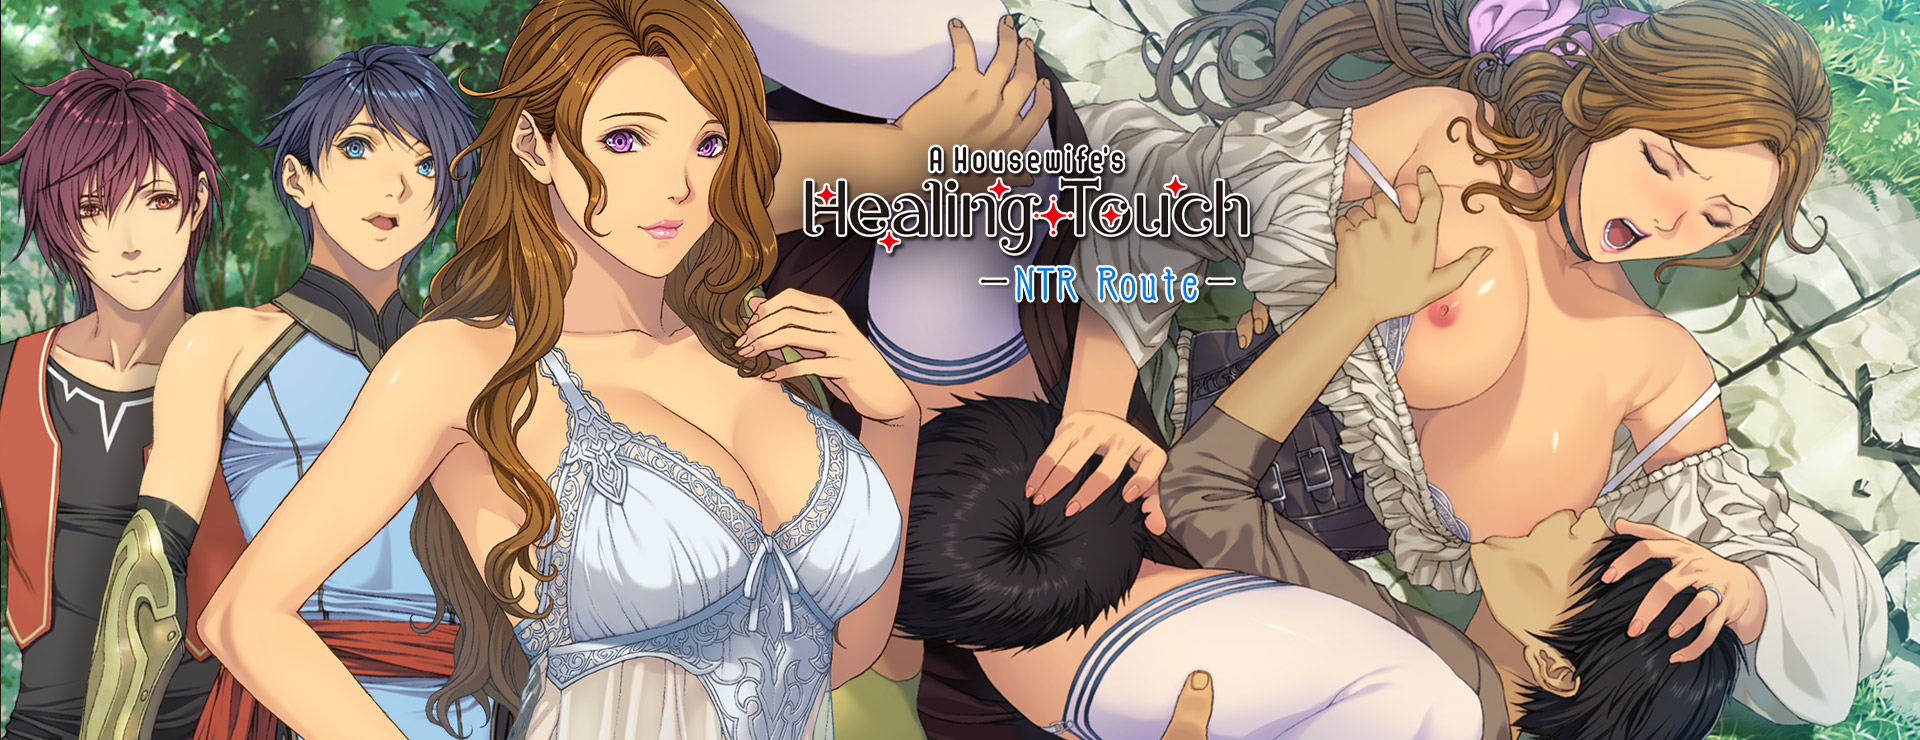 A Housewife's Healing Touch (NTR Route) - Action Aventure Jeu